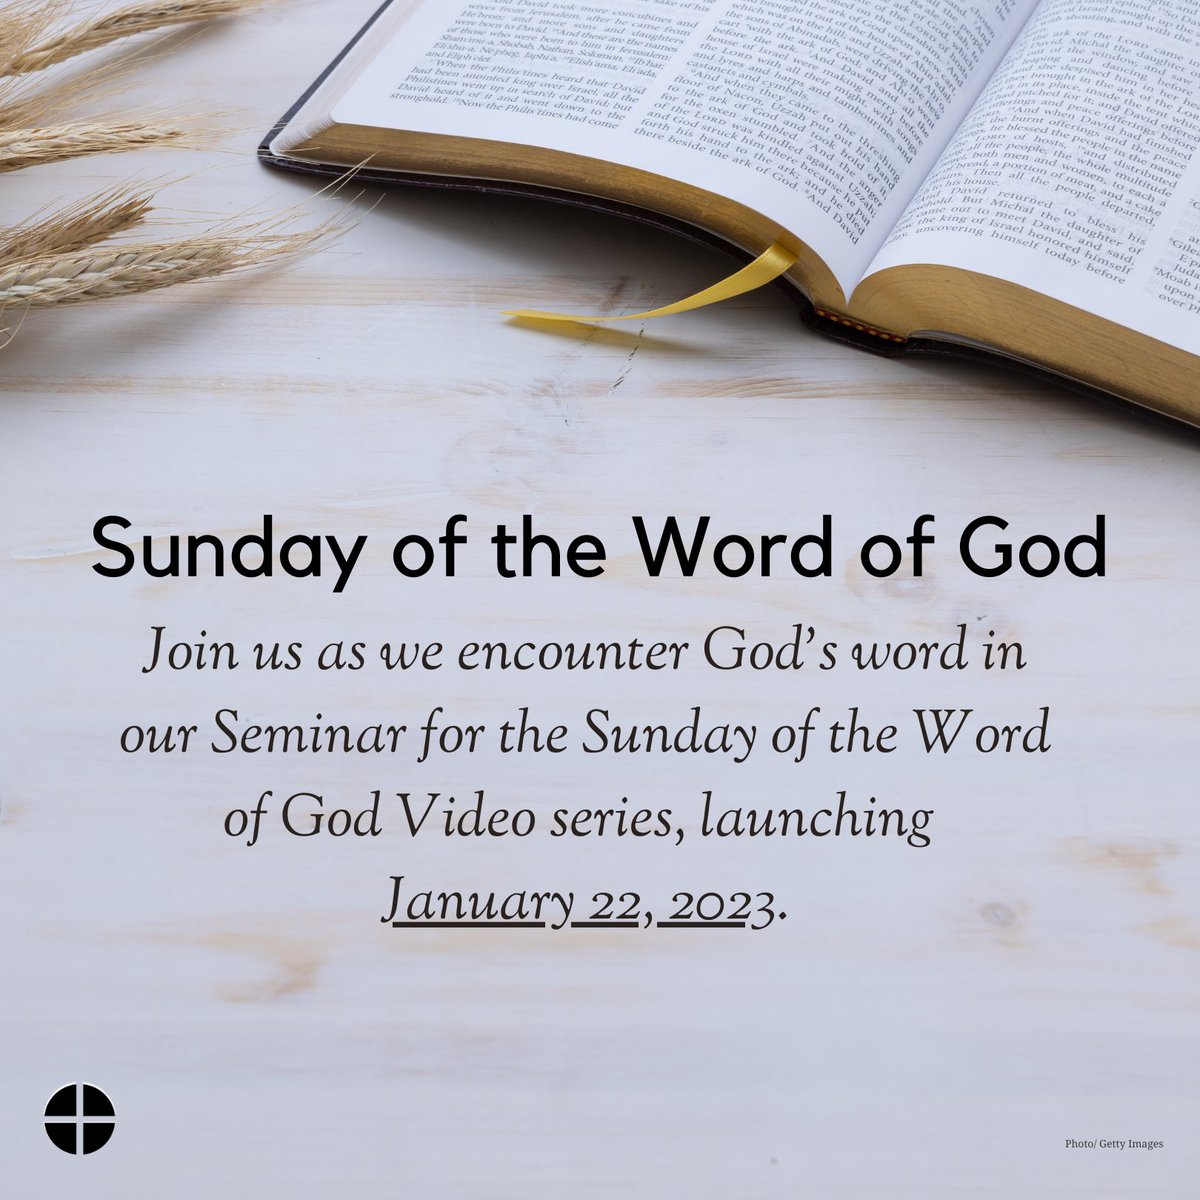 test Twitter Media - On January 22, the Catholic Church celebrates “Sunday of the Word of God,” an opportunity to encounter the beauty of God’s word as proclaimed in the scriptures. Join us as we launch a Sunday Scripture Video series on January 22, 2023! 

https://t.co/lFL5C1GEVL https://t.co/81QzVKJ19V